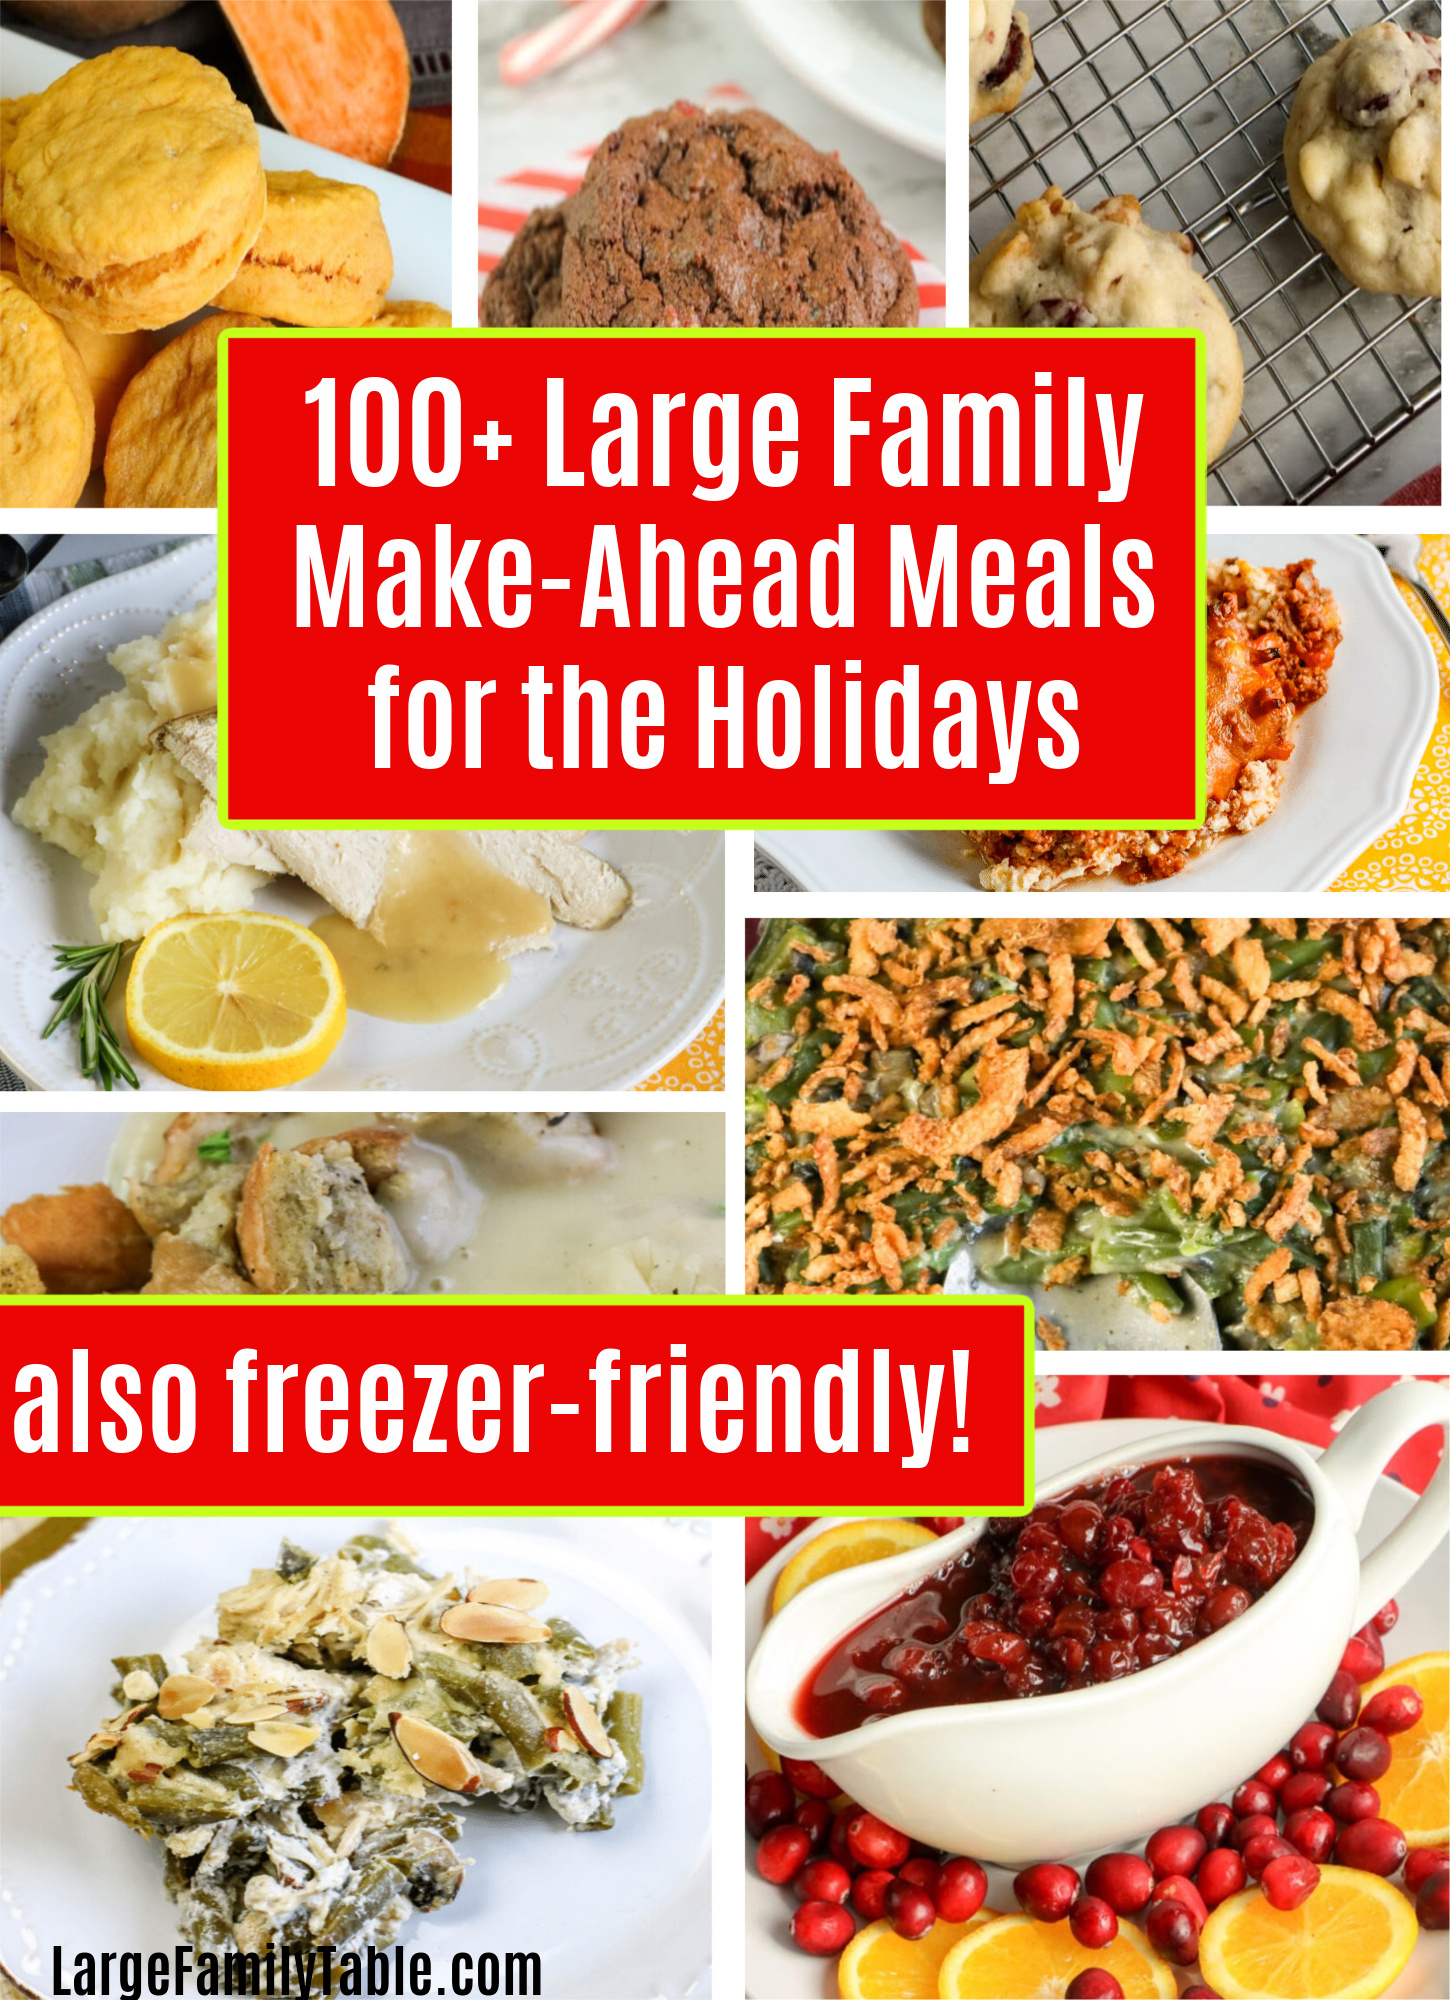 100+ Large Family Make-Ahead Meals for the Holidays (also Freezer-Friendly!)